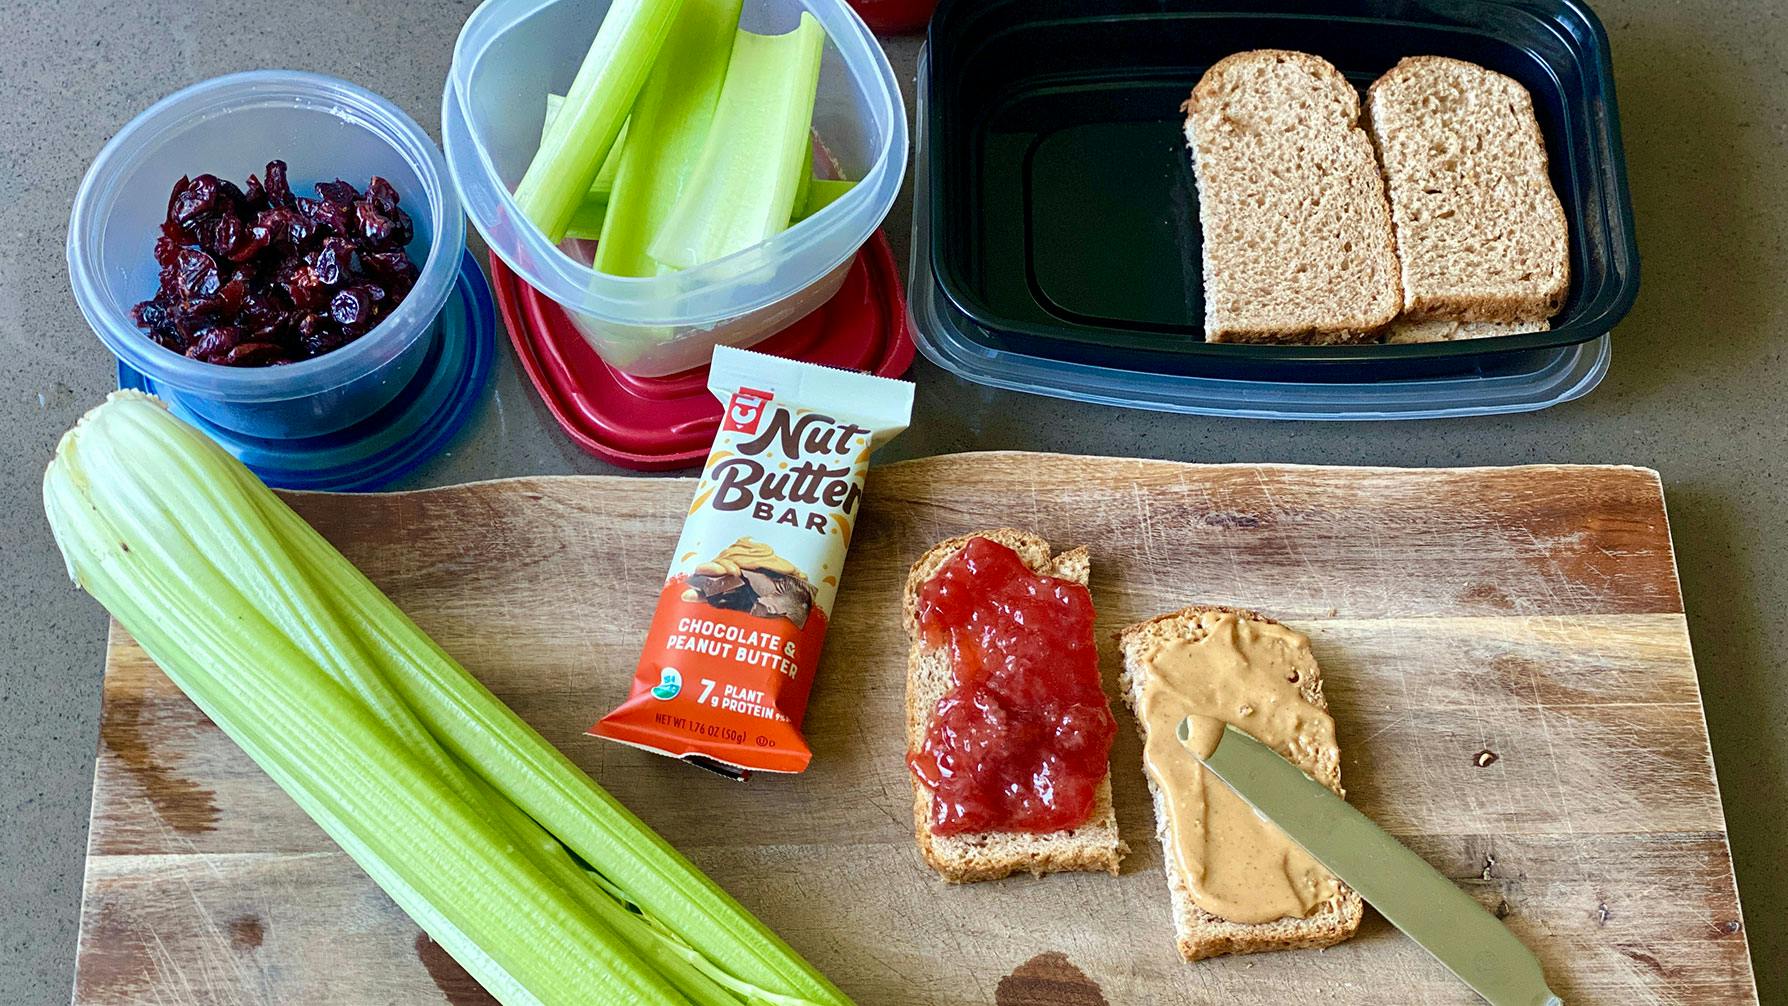 Nut Butter Bar Chocolate & Peanut Butter, sandwiches, cranberries, and celery beach snacks